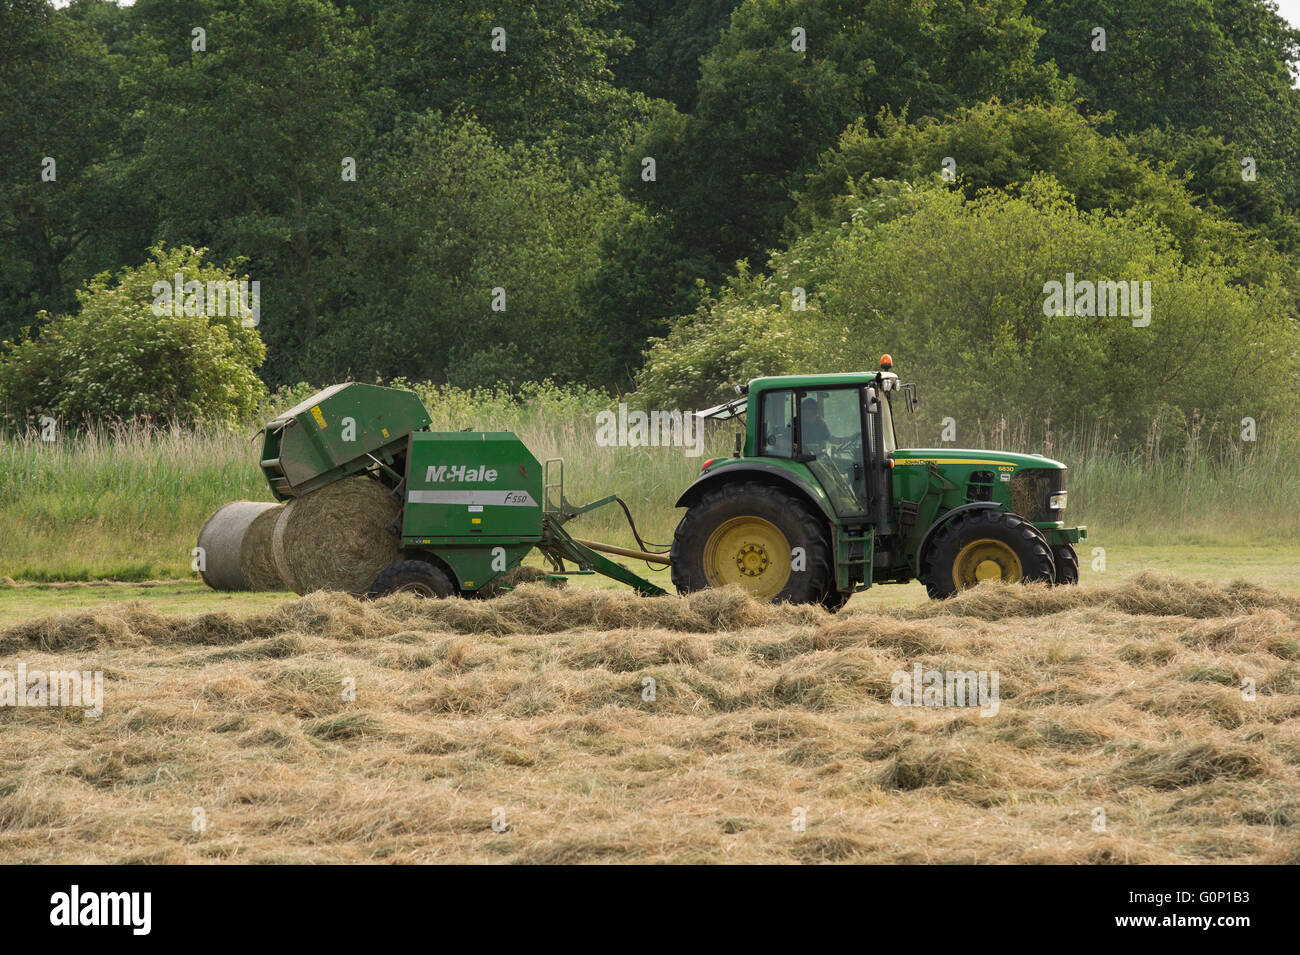 Great Ouseburn, North Yorkshire, GB, UK - round bale dropping & falling from a baler pulled by a green farm tractor working in a field, making silage. Stock Photo